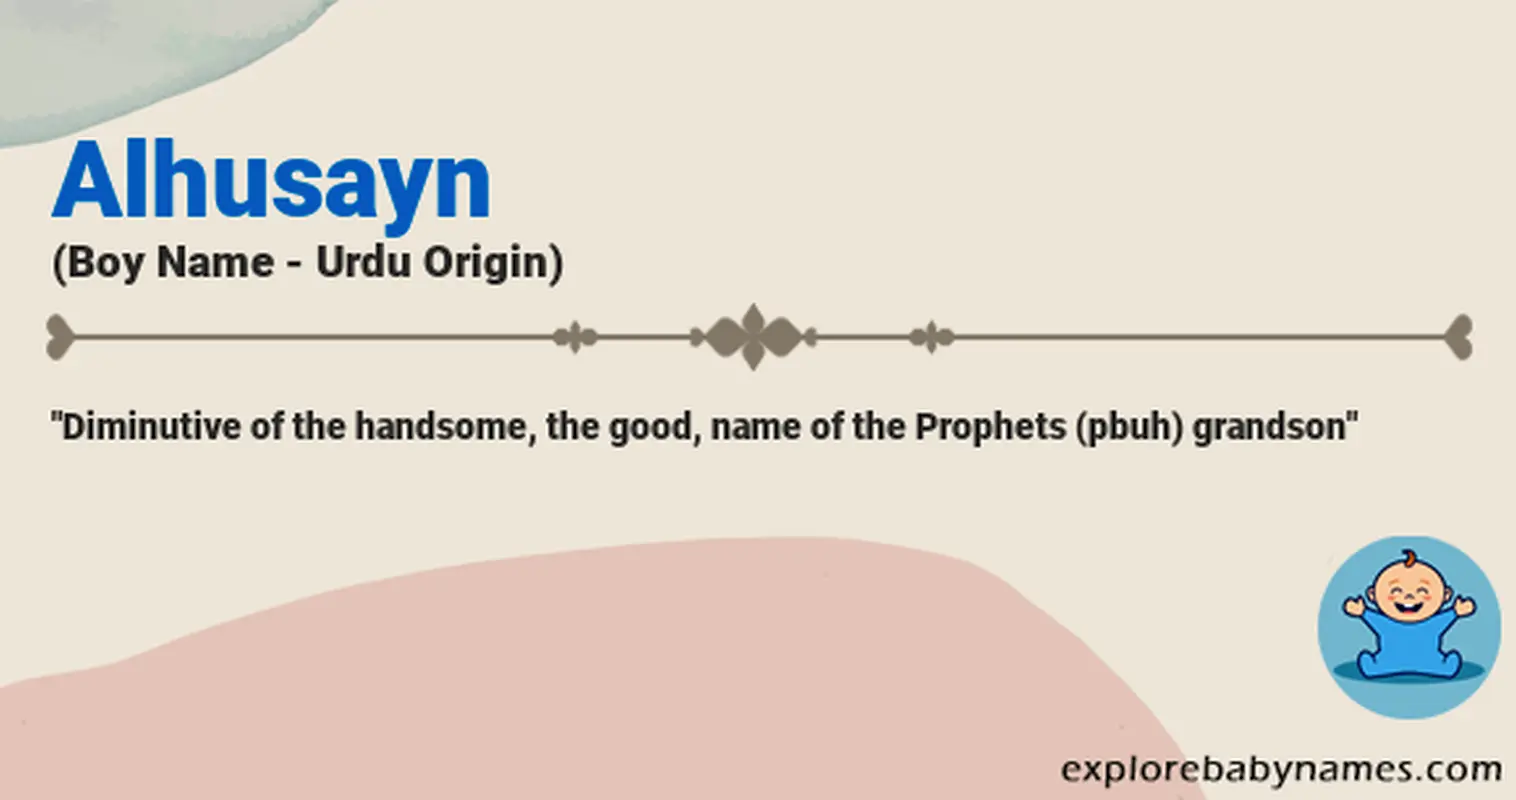 Meaning of Alhusayn